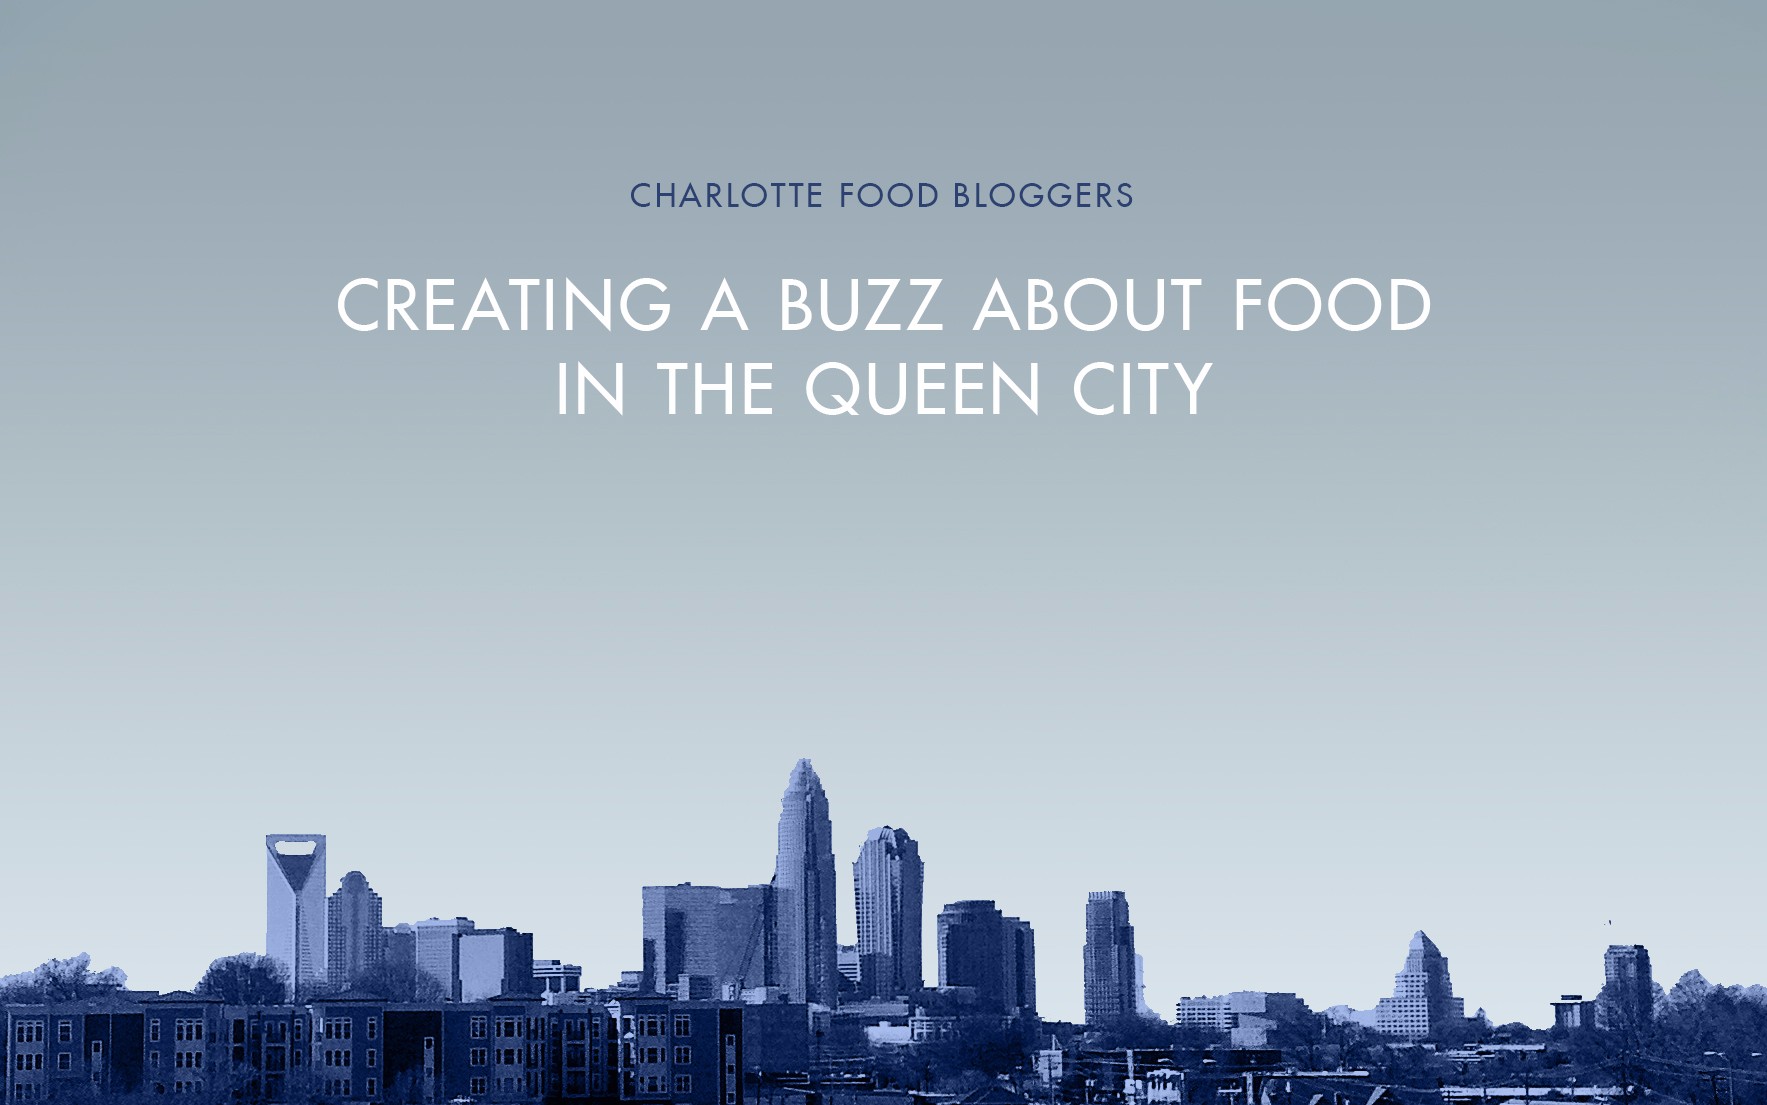 Charlotte Food Bloggers - Creating a buzz about food in the Queen City